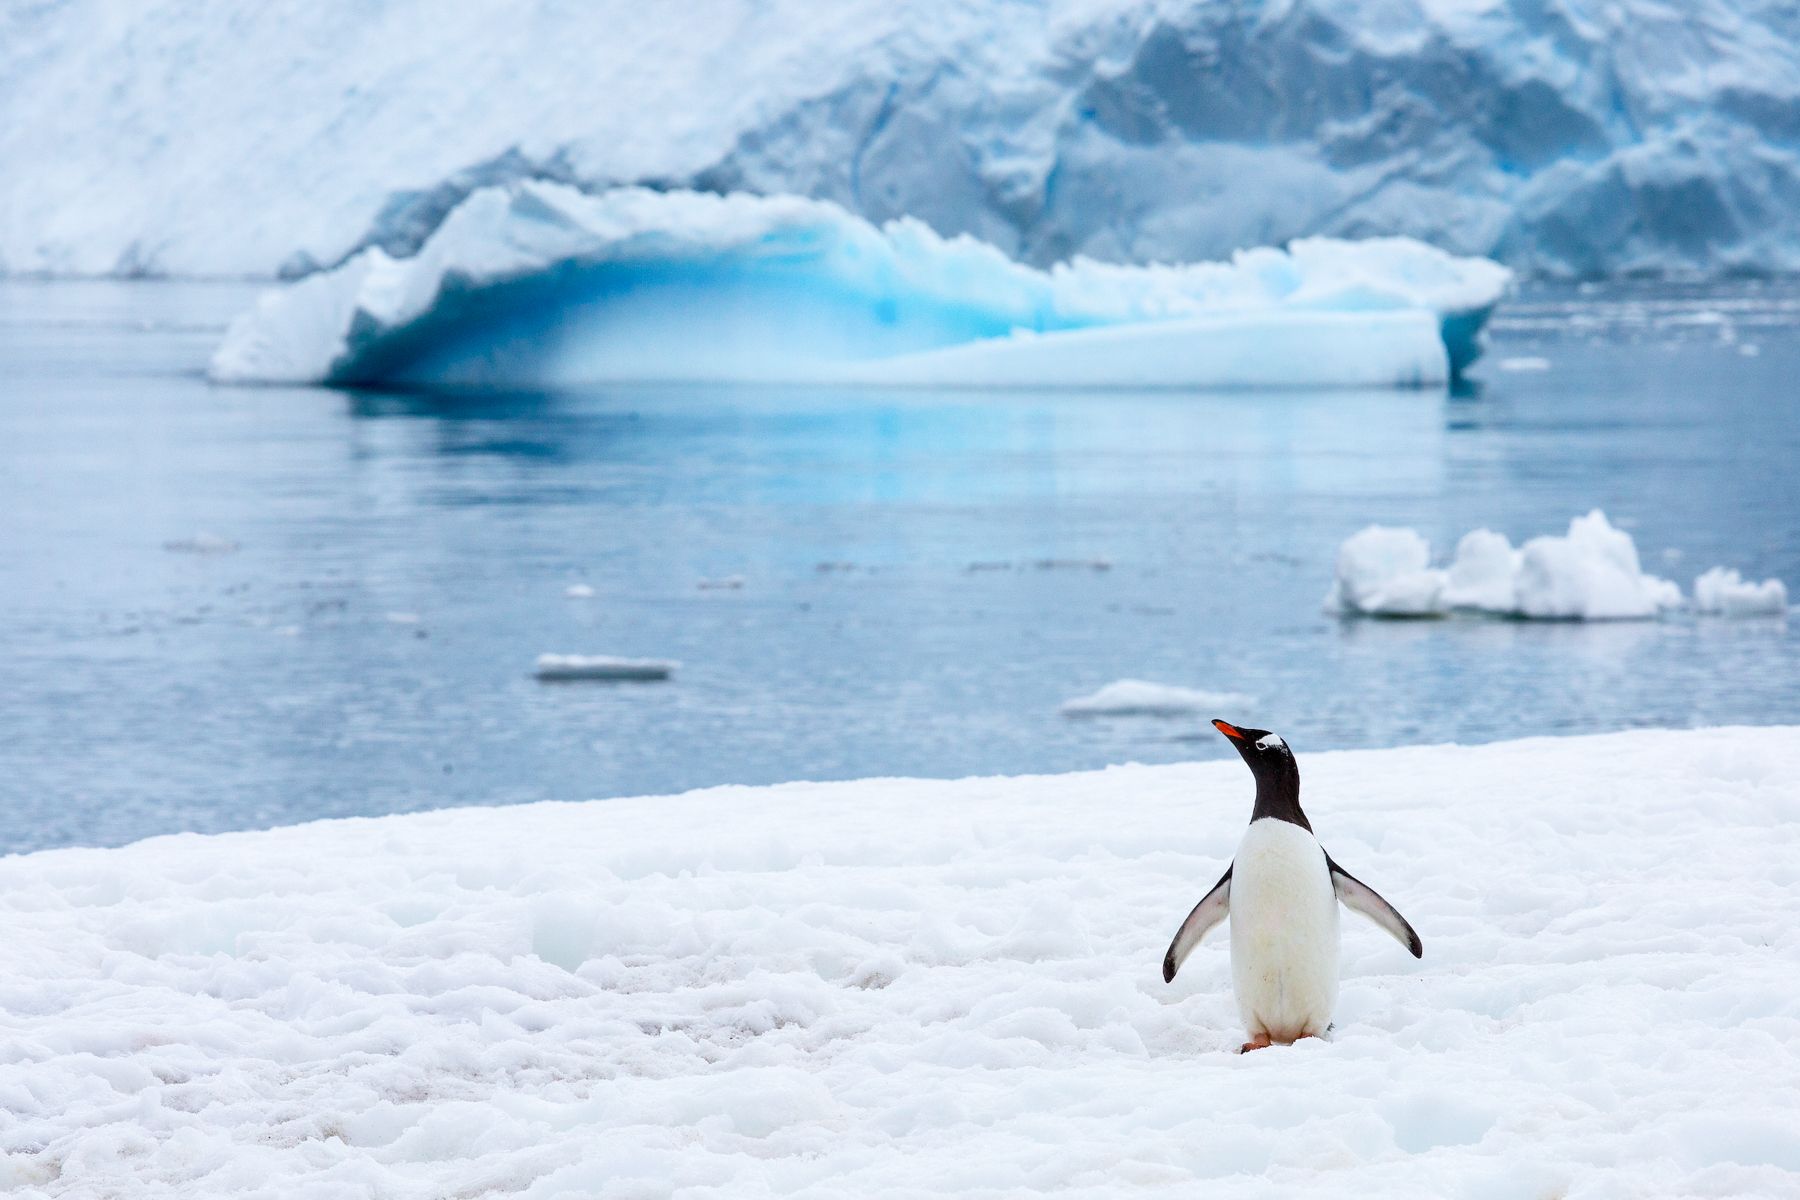 A A Gentoo Penguin in its icy Antarctic world